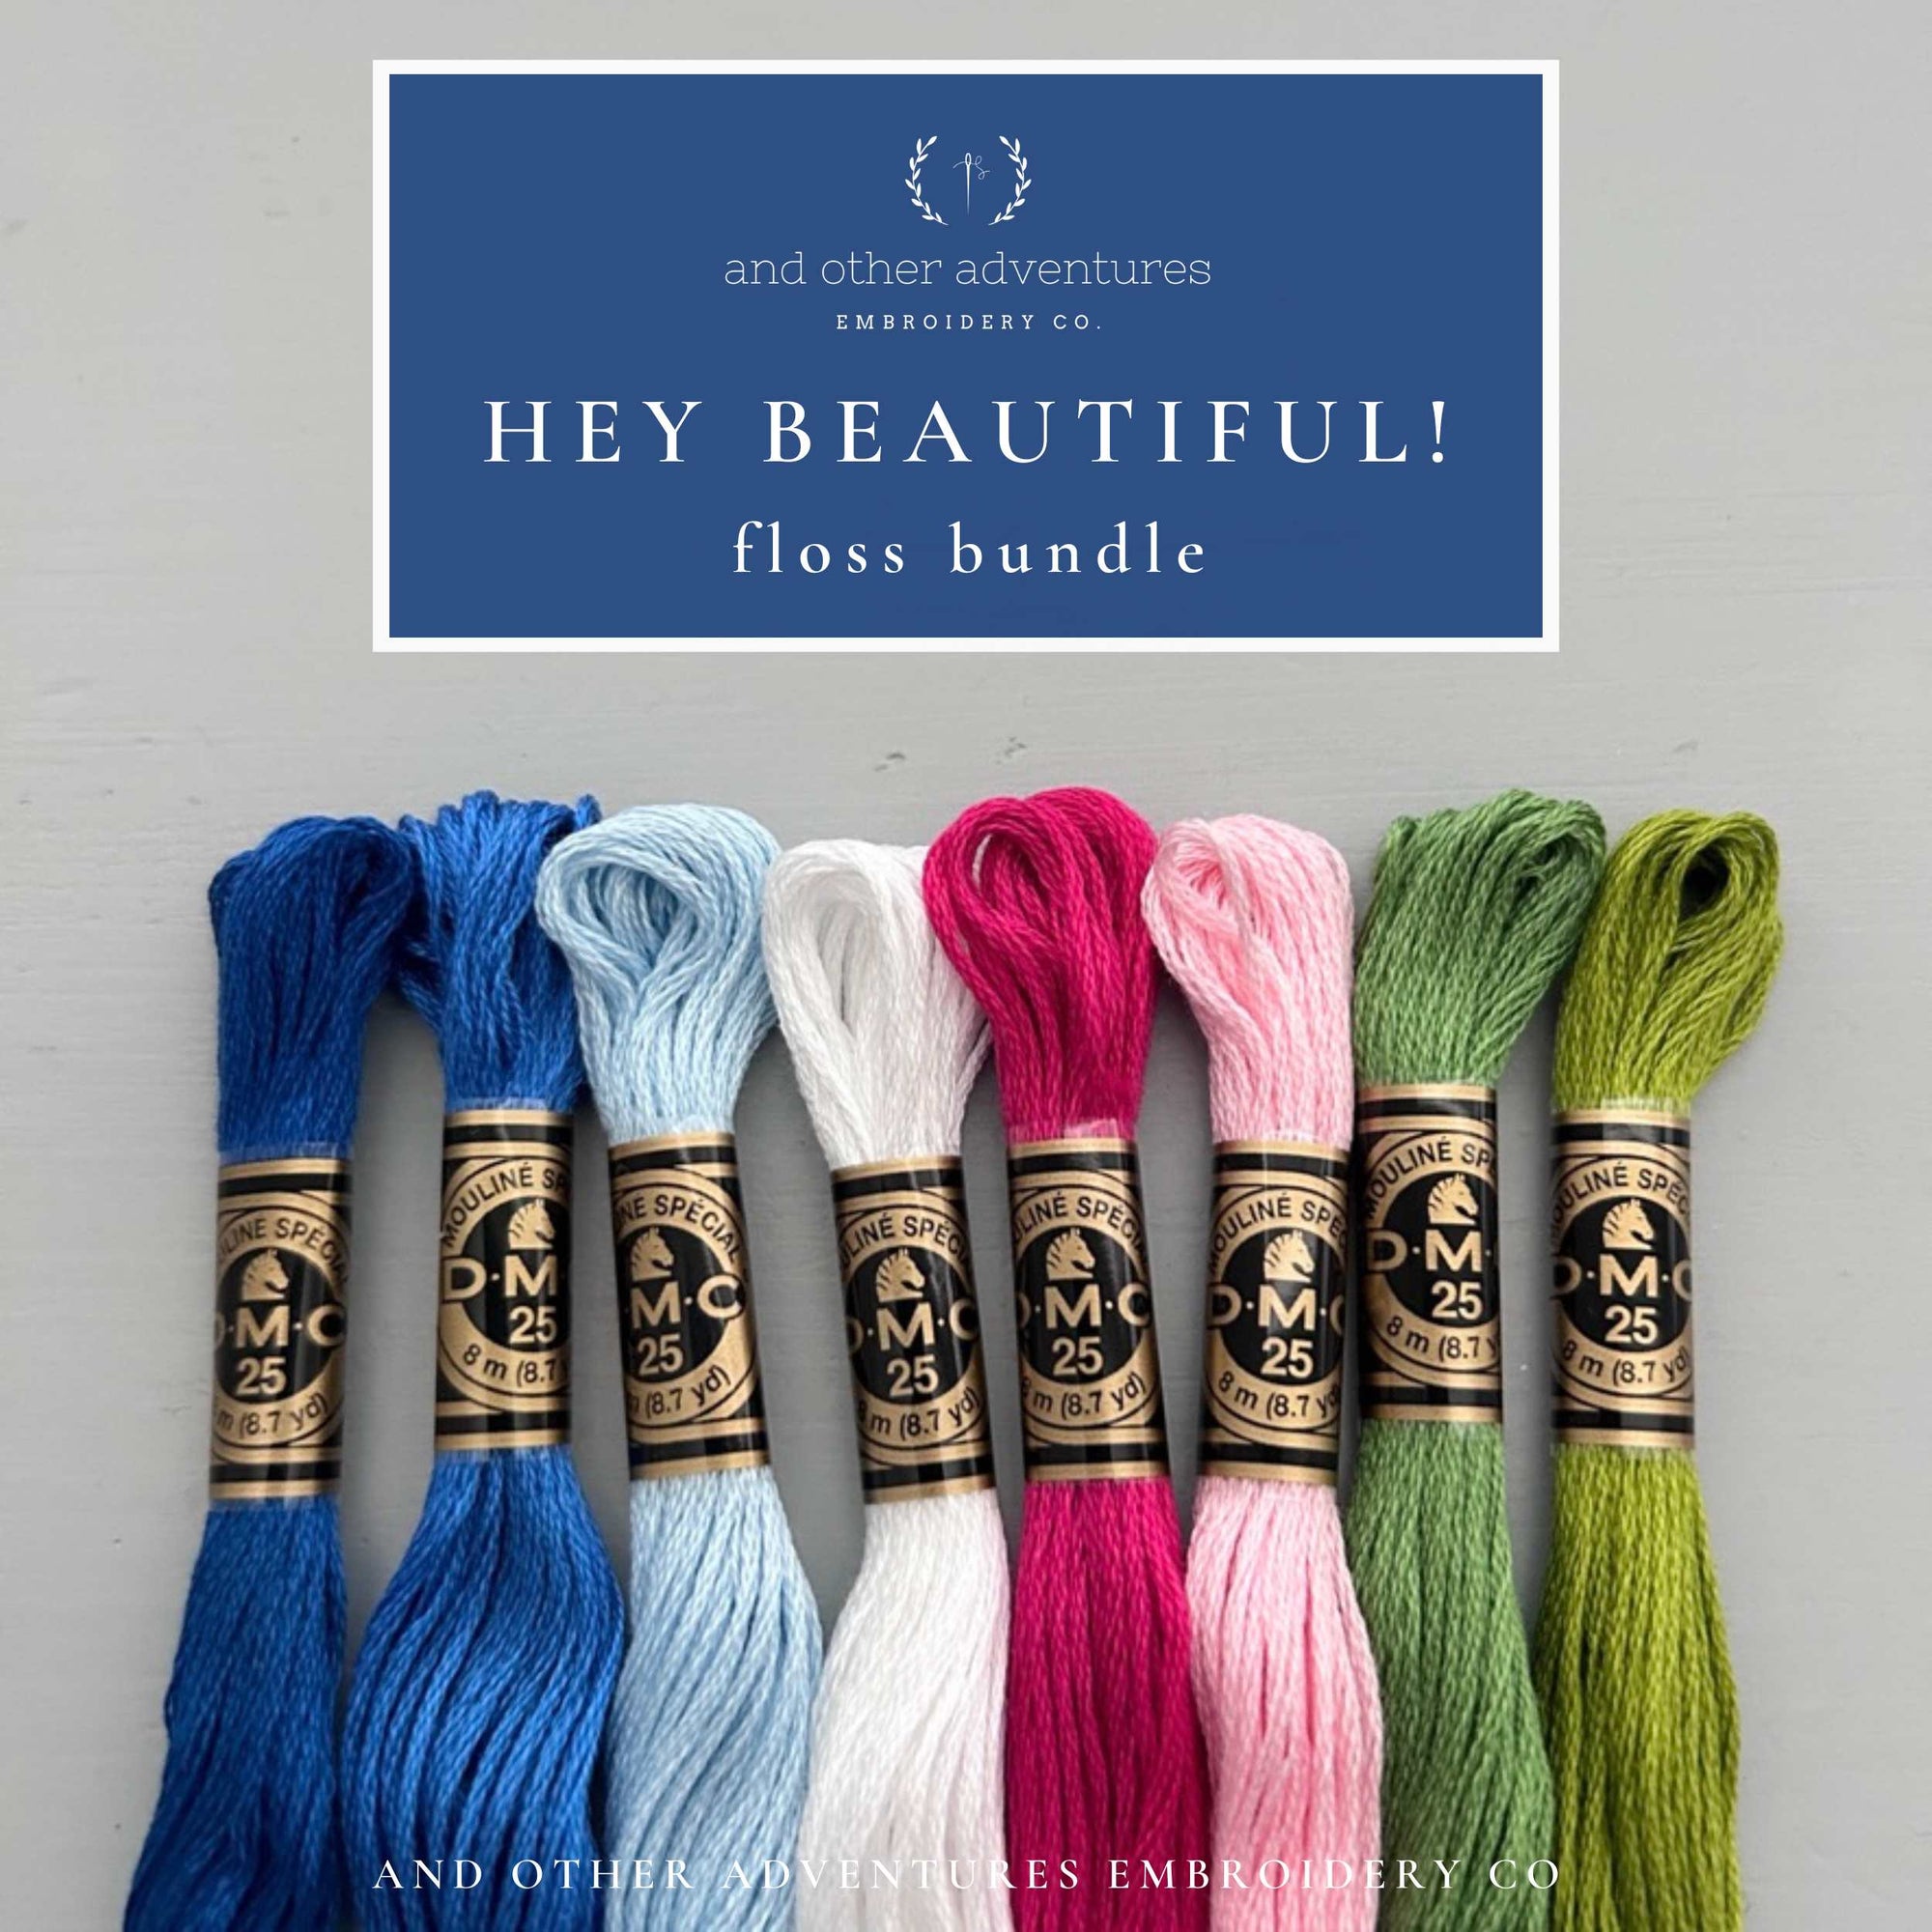 Hey Beautiful! Floss bundle by And Other Adventures Embroidery Co